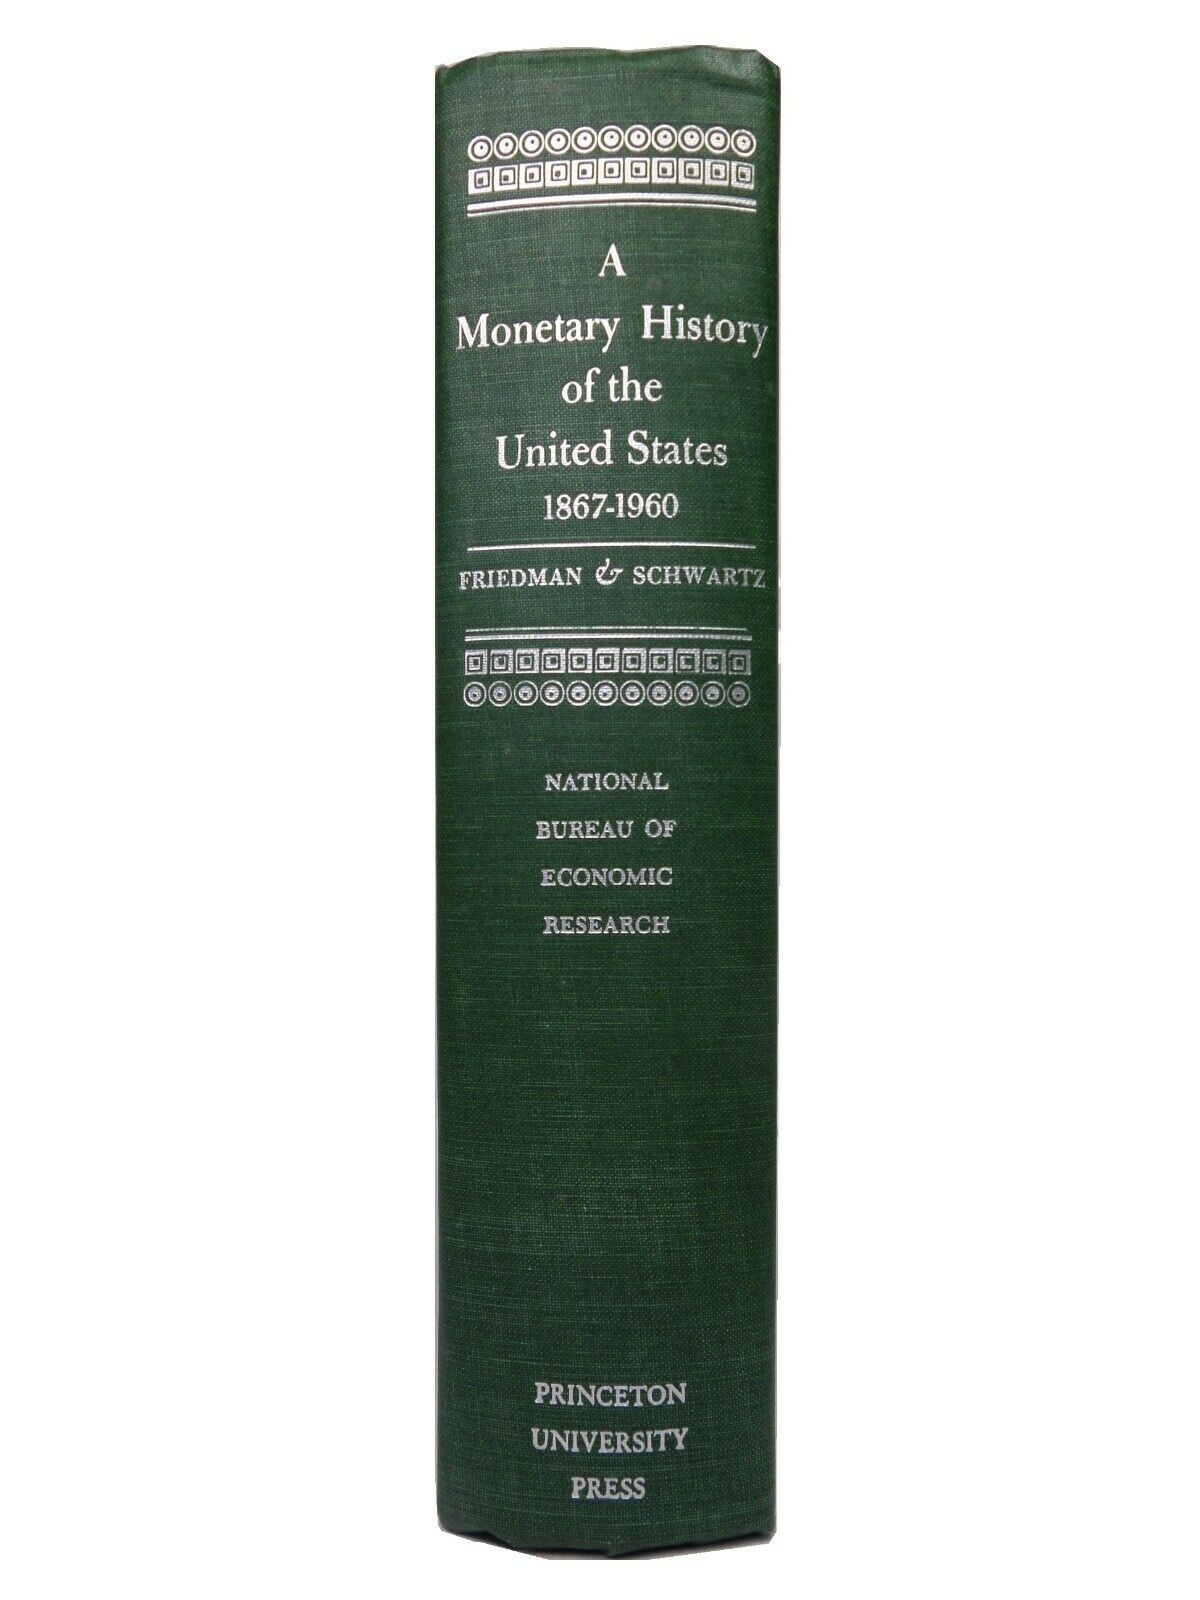 MONETARY HISTORY OF THE UNITED STATES 1867-1960 MILTON FRIEDMAN & ANNA JACOBSON SCHWARTZ FIRST EDITION